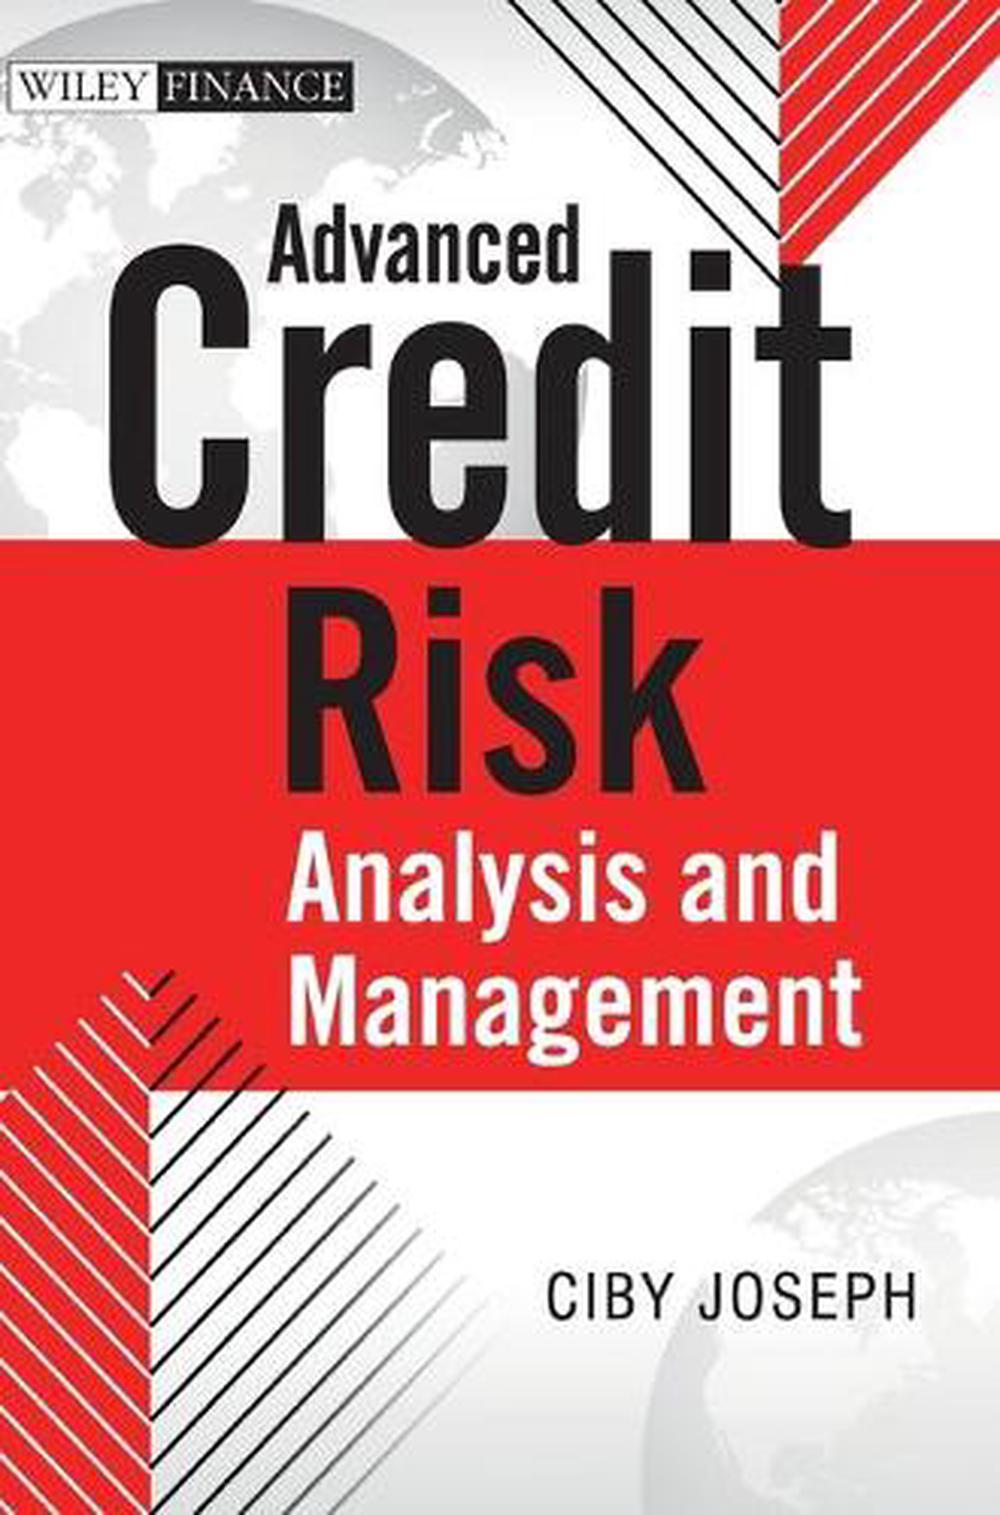 literature review on credit risk management